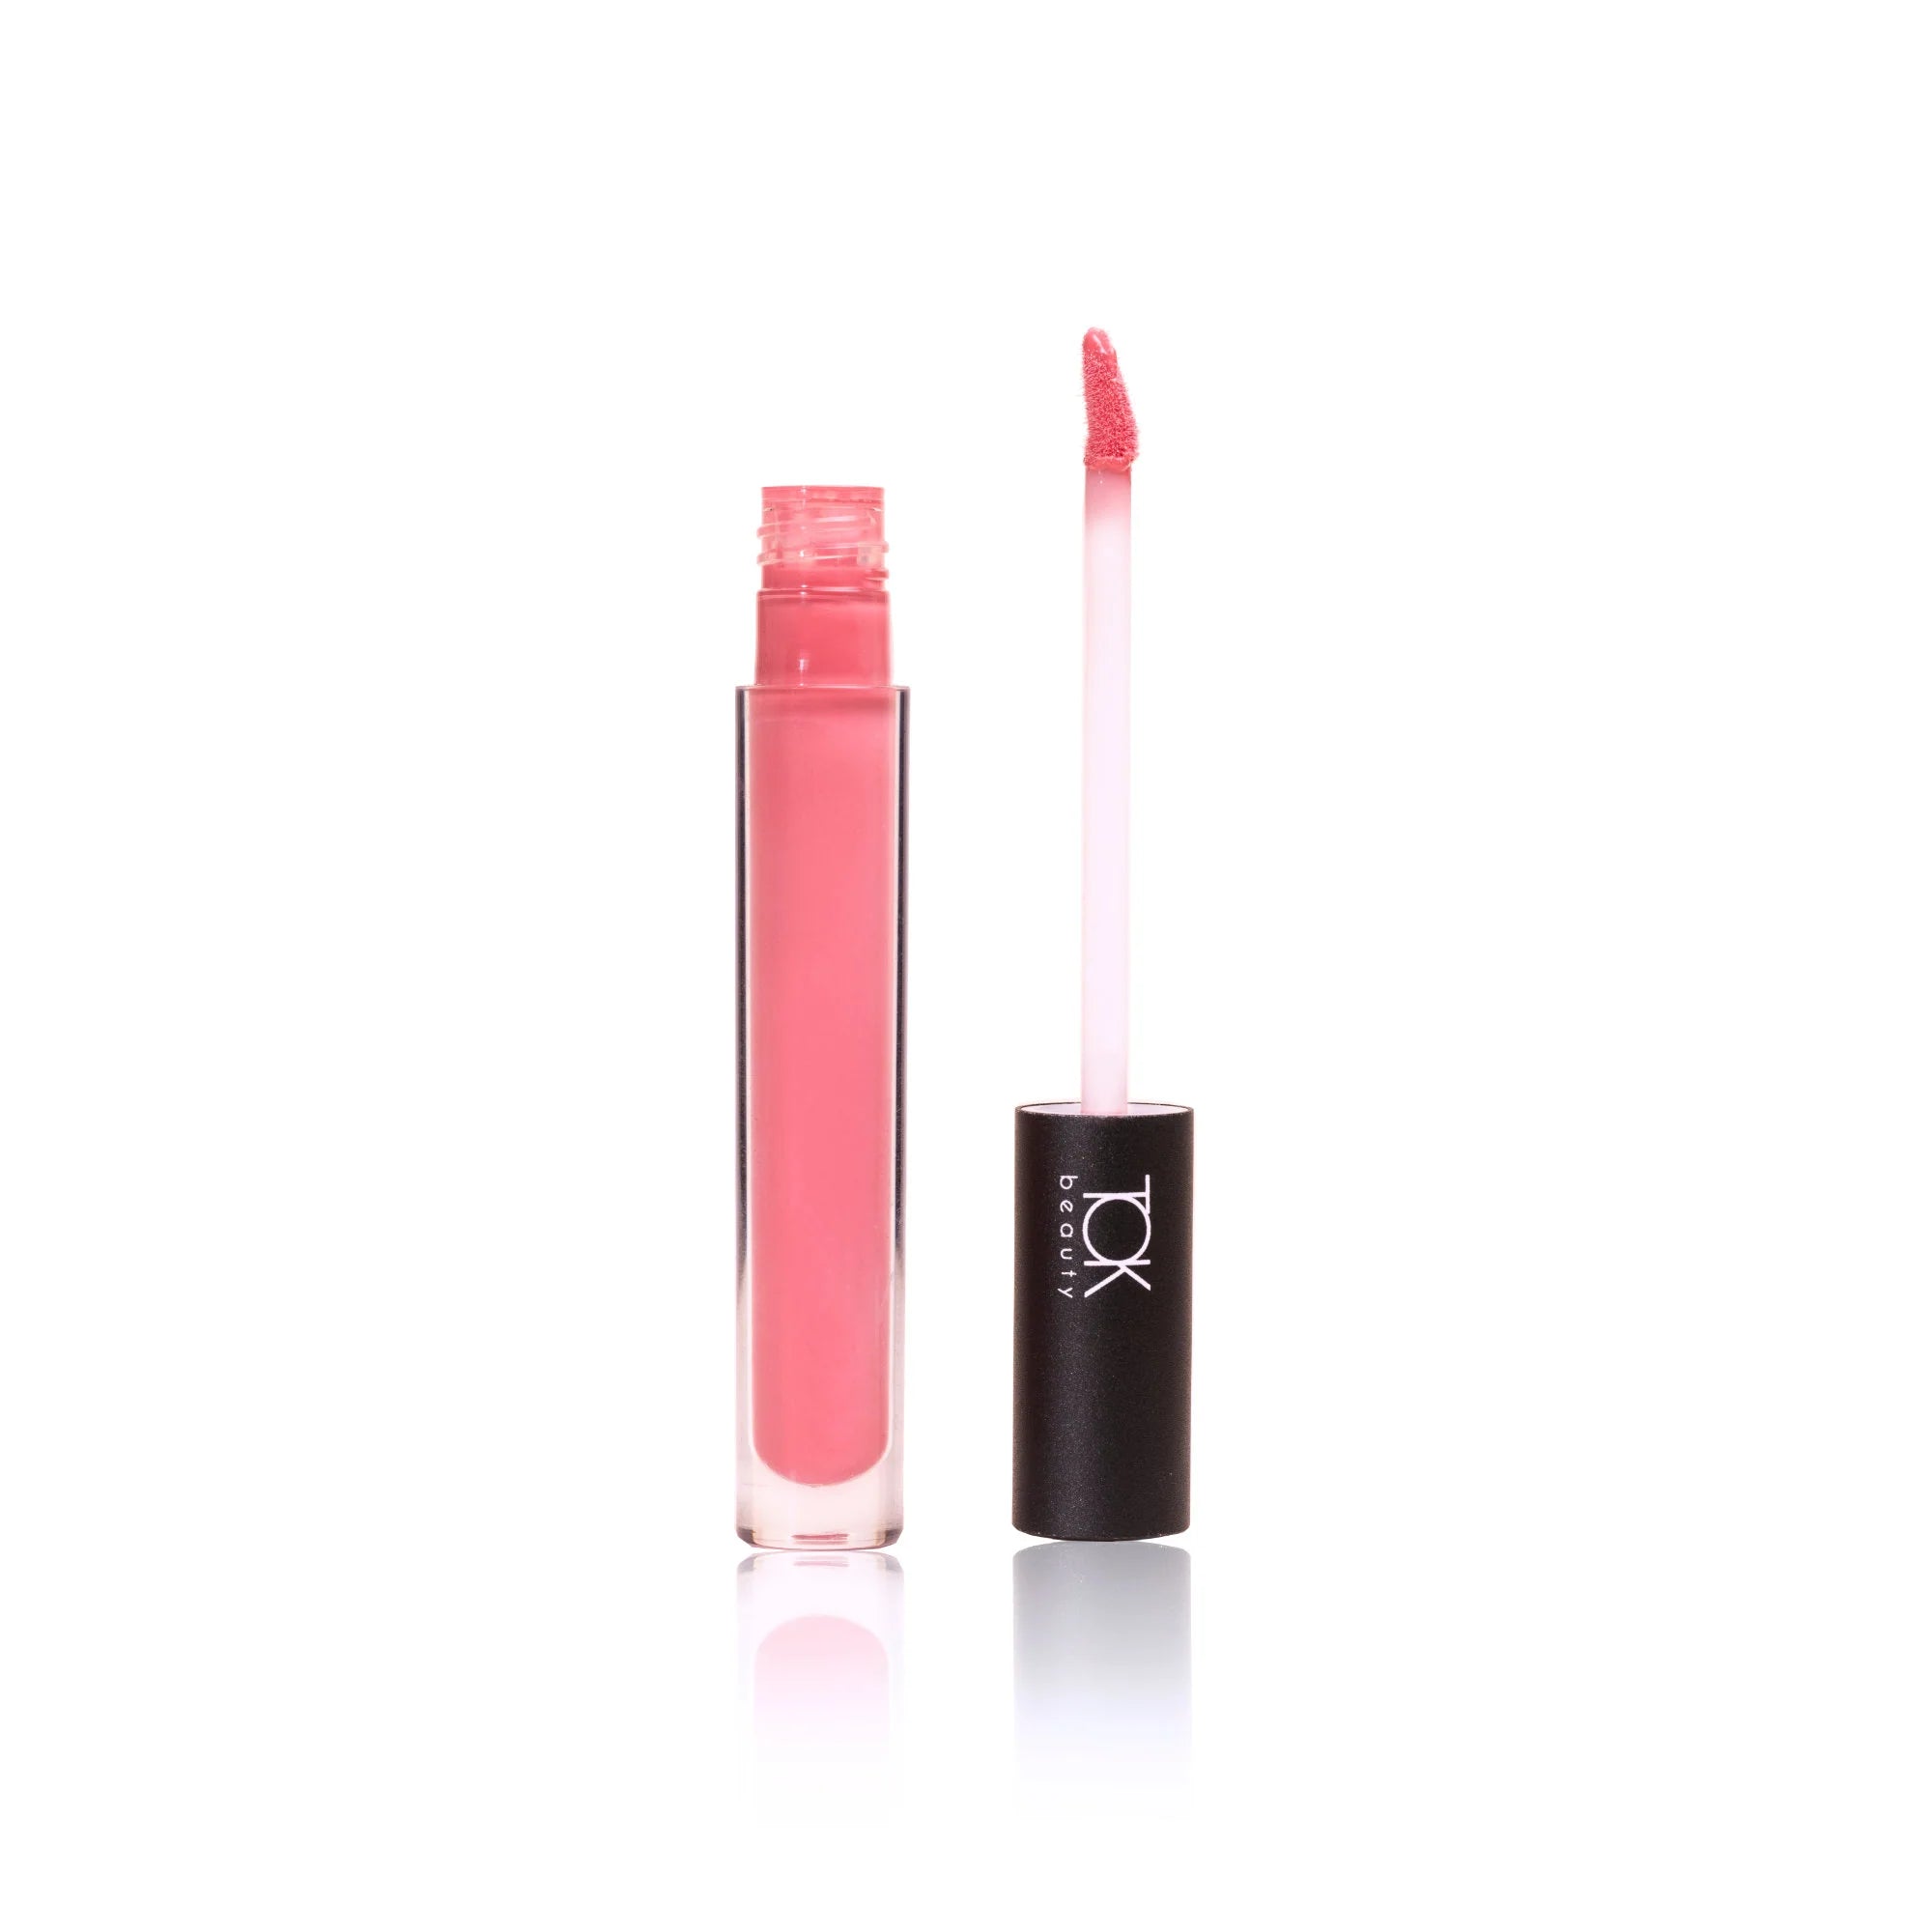 Tok beauty lip tonic in heart pink color with wand showing